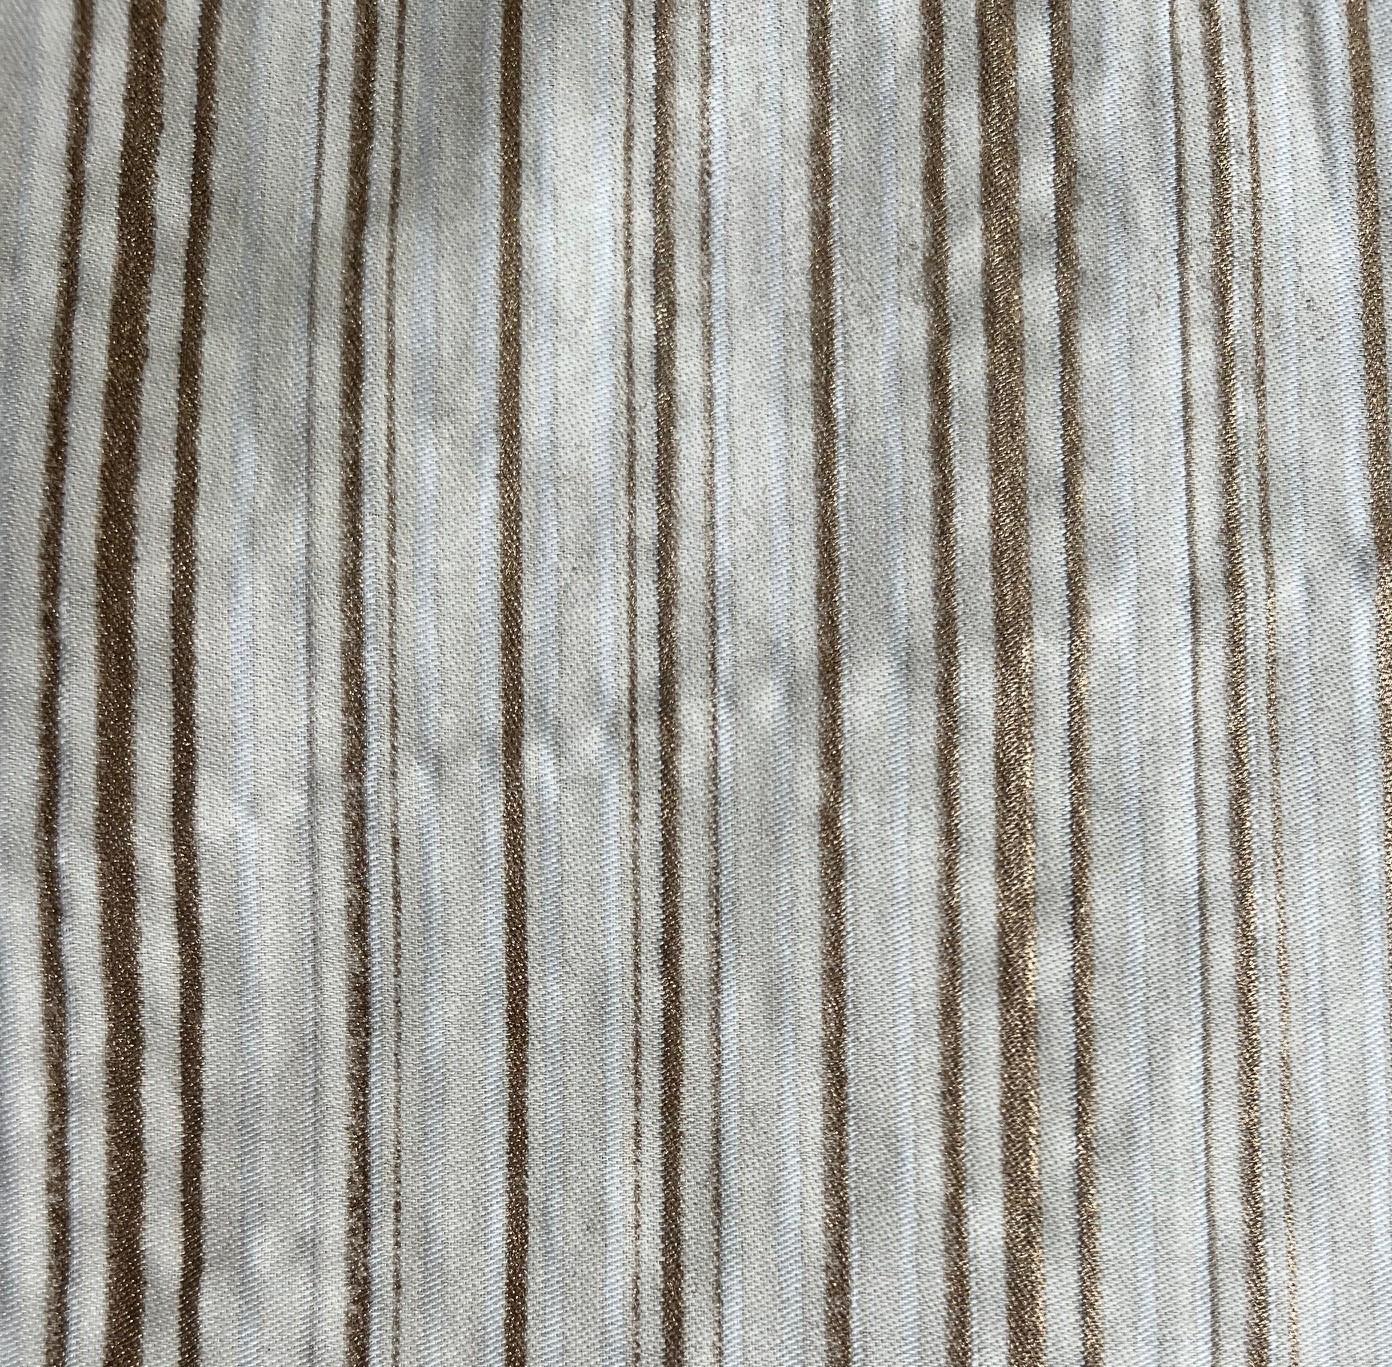 Italian Venetian Fortuny Malmaison Fabric in String and Gold Stripes on Ivory, 28 Yards For Sale